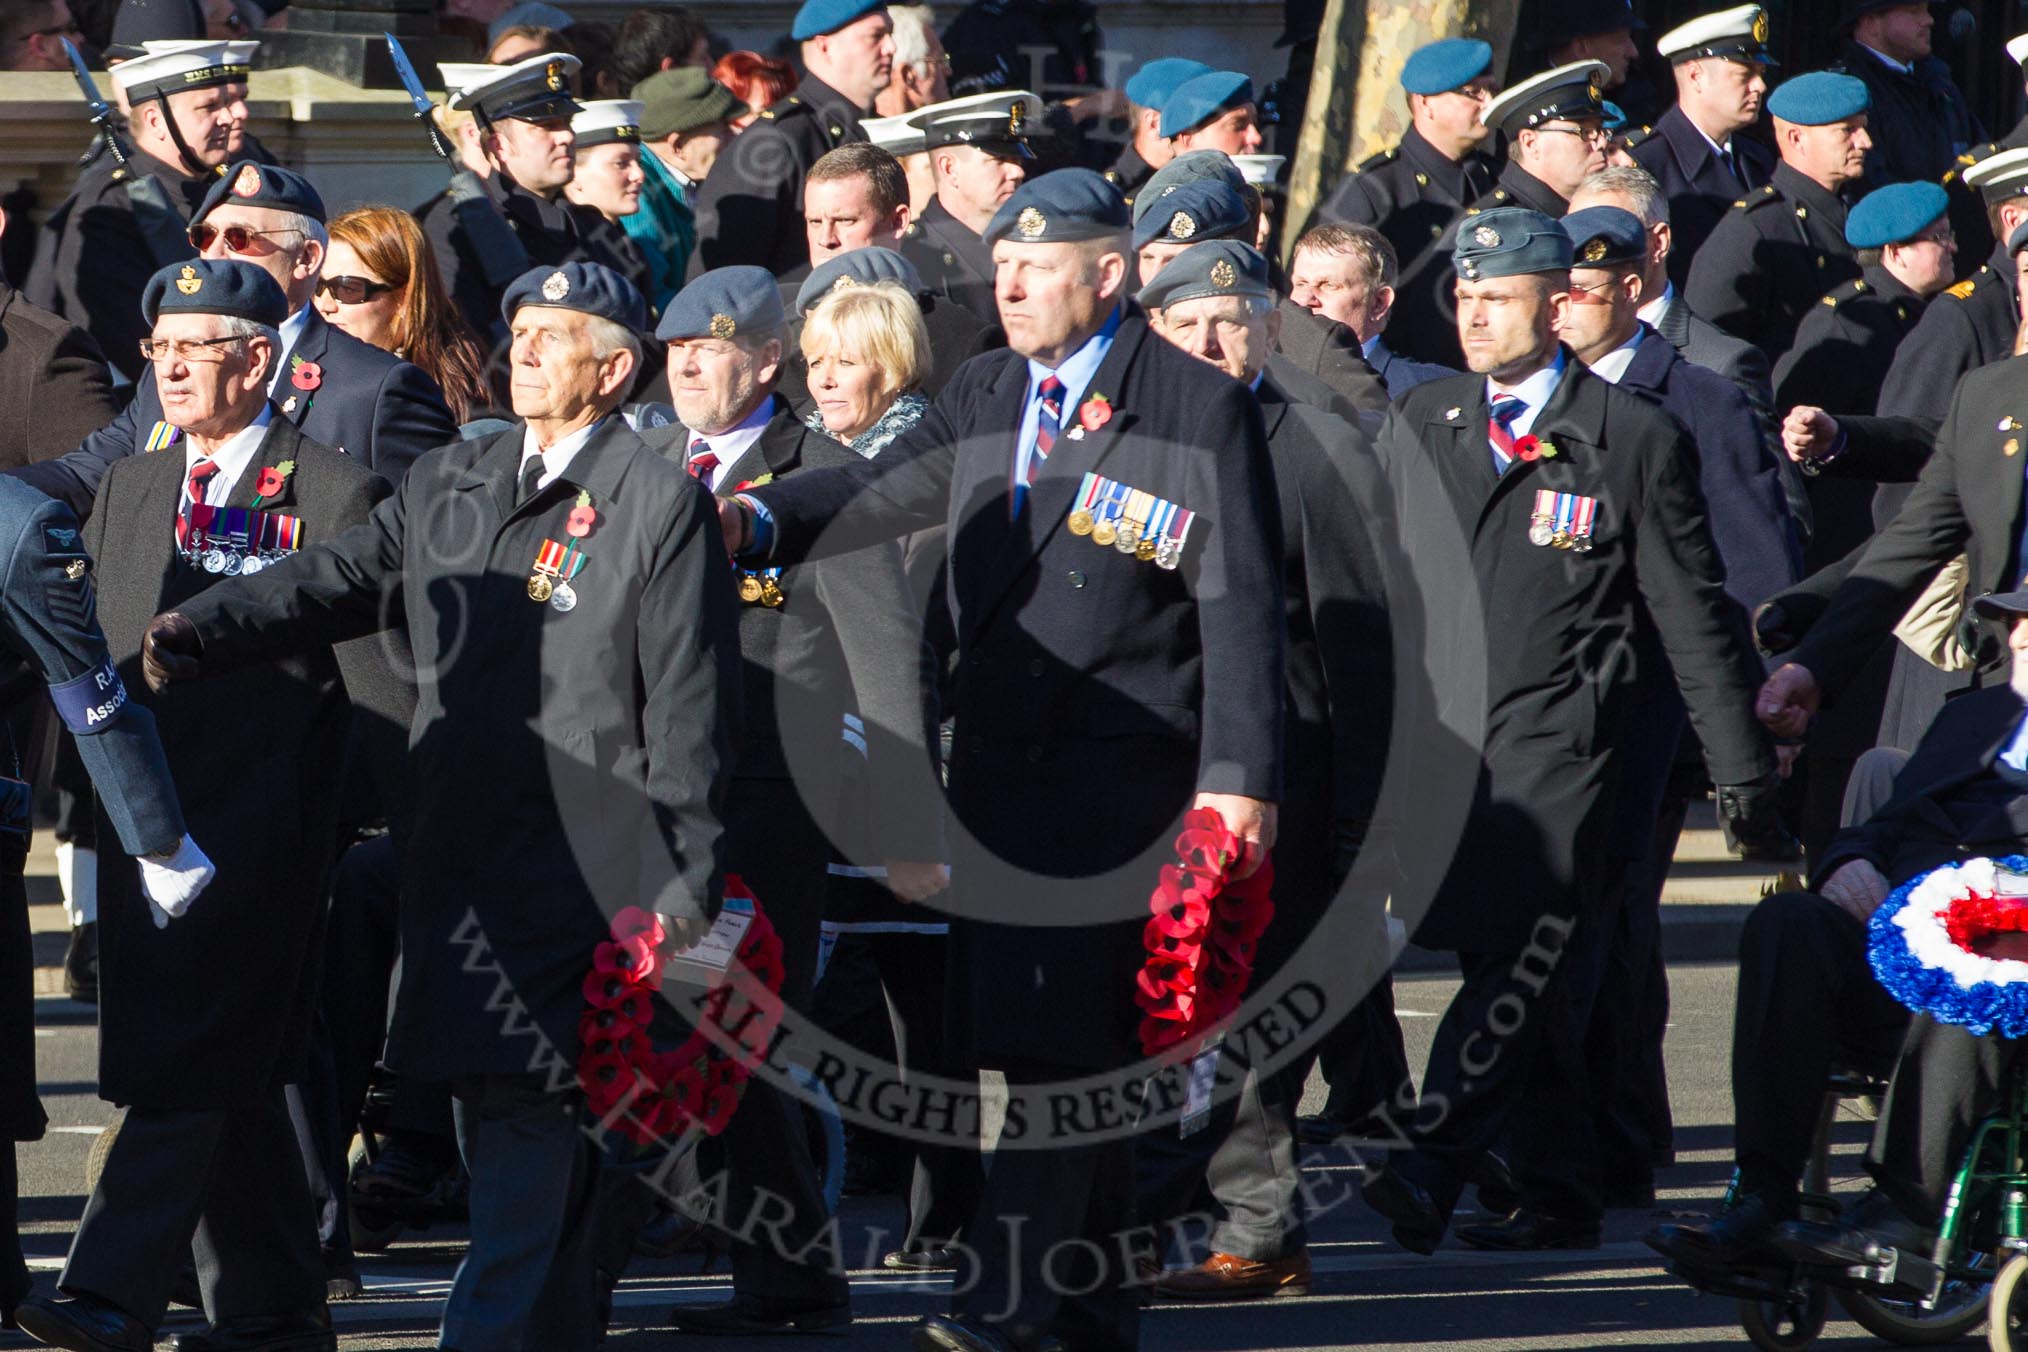 Remembrance Sunday 2012 Cenotaph March Past: Group C3 - Royal Air Forces Association..
Whitehall, Cenotaph,
London SW1,

United Kingdom,
on 11 November 2012 at 12:01, image #1075